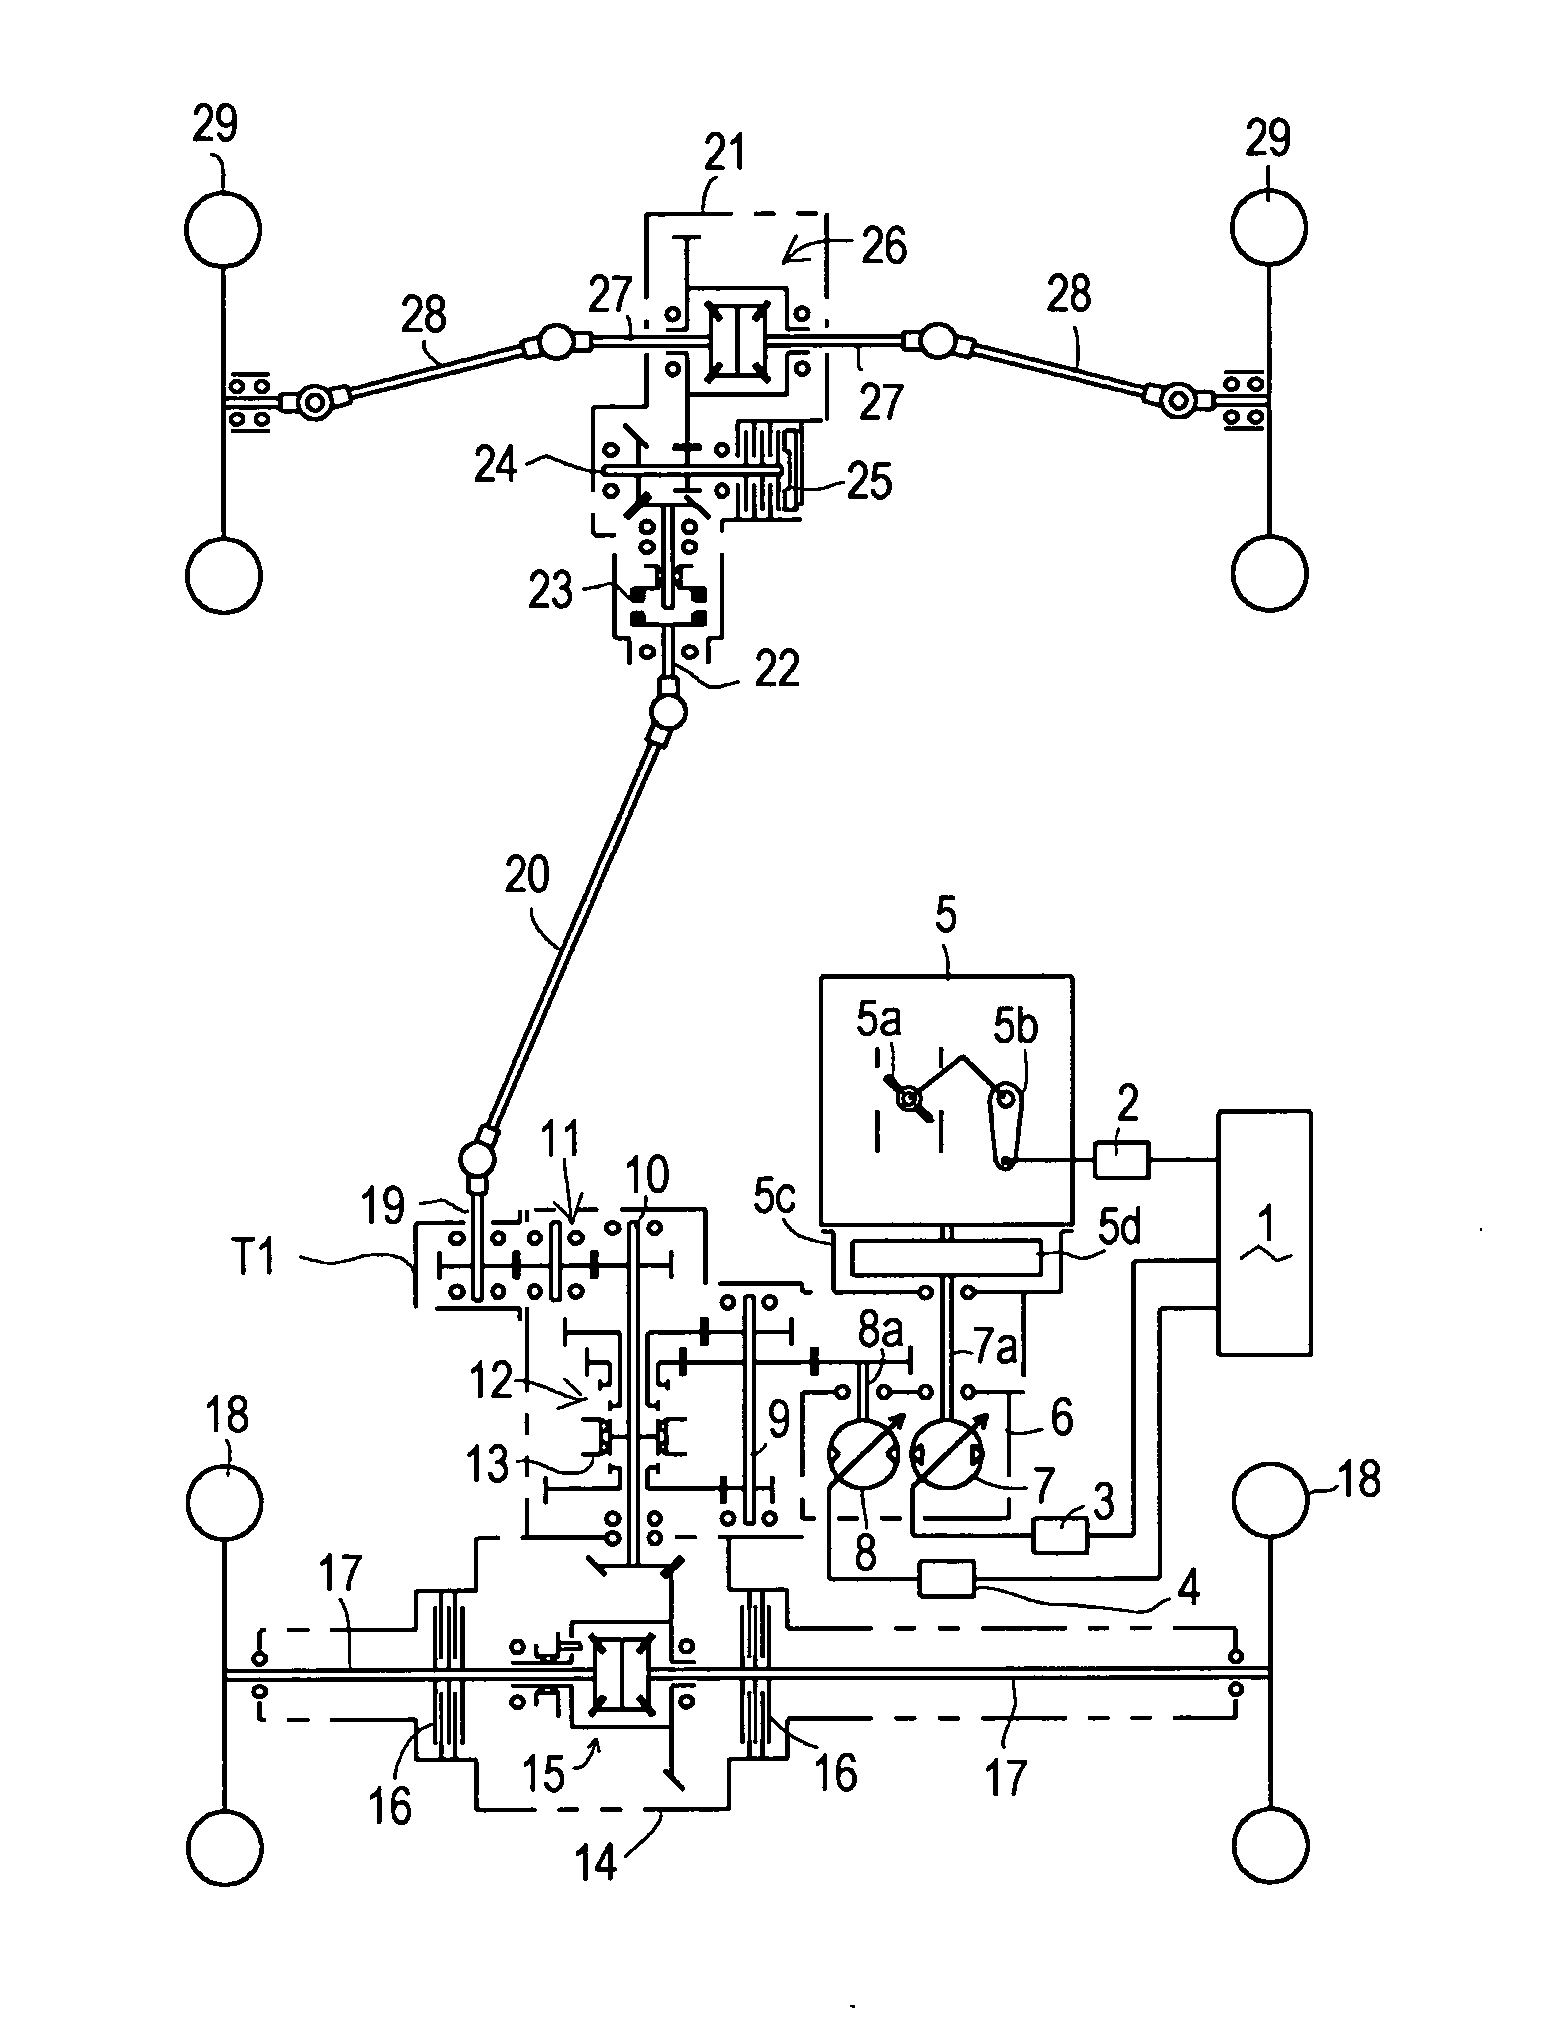 Speed control method for working vehicle